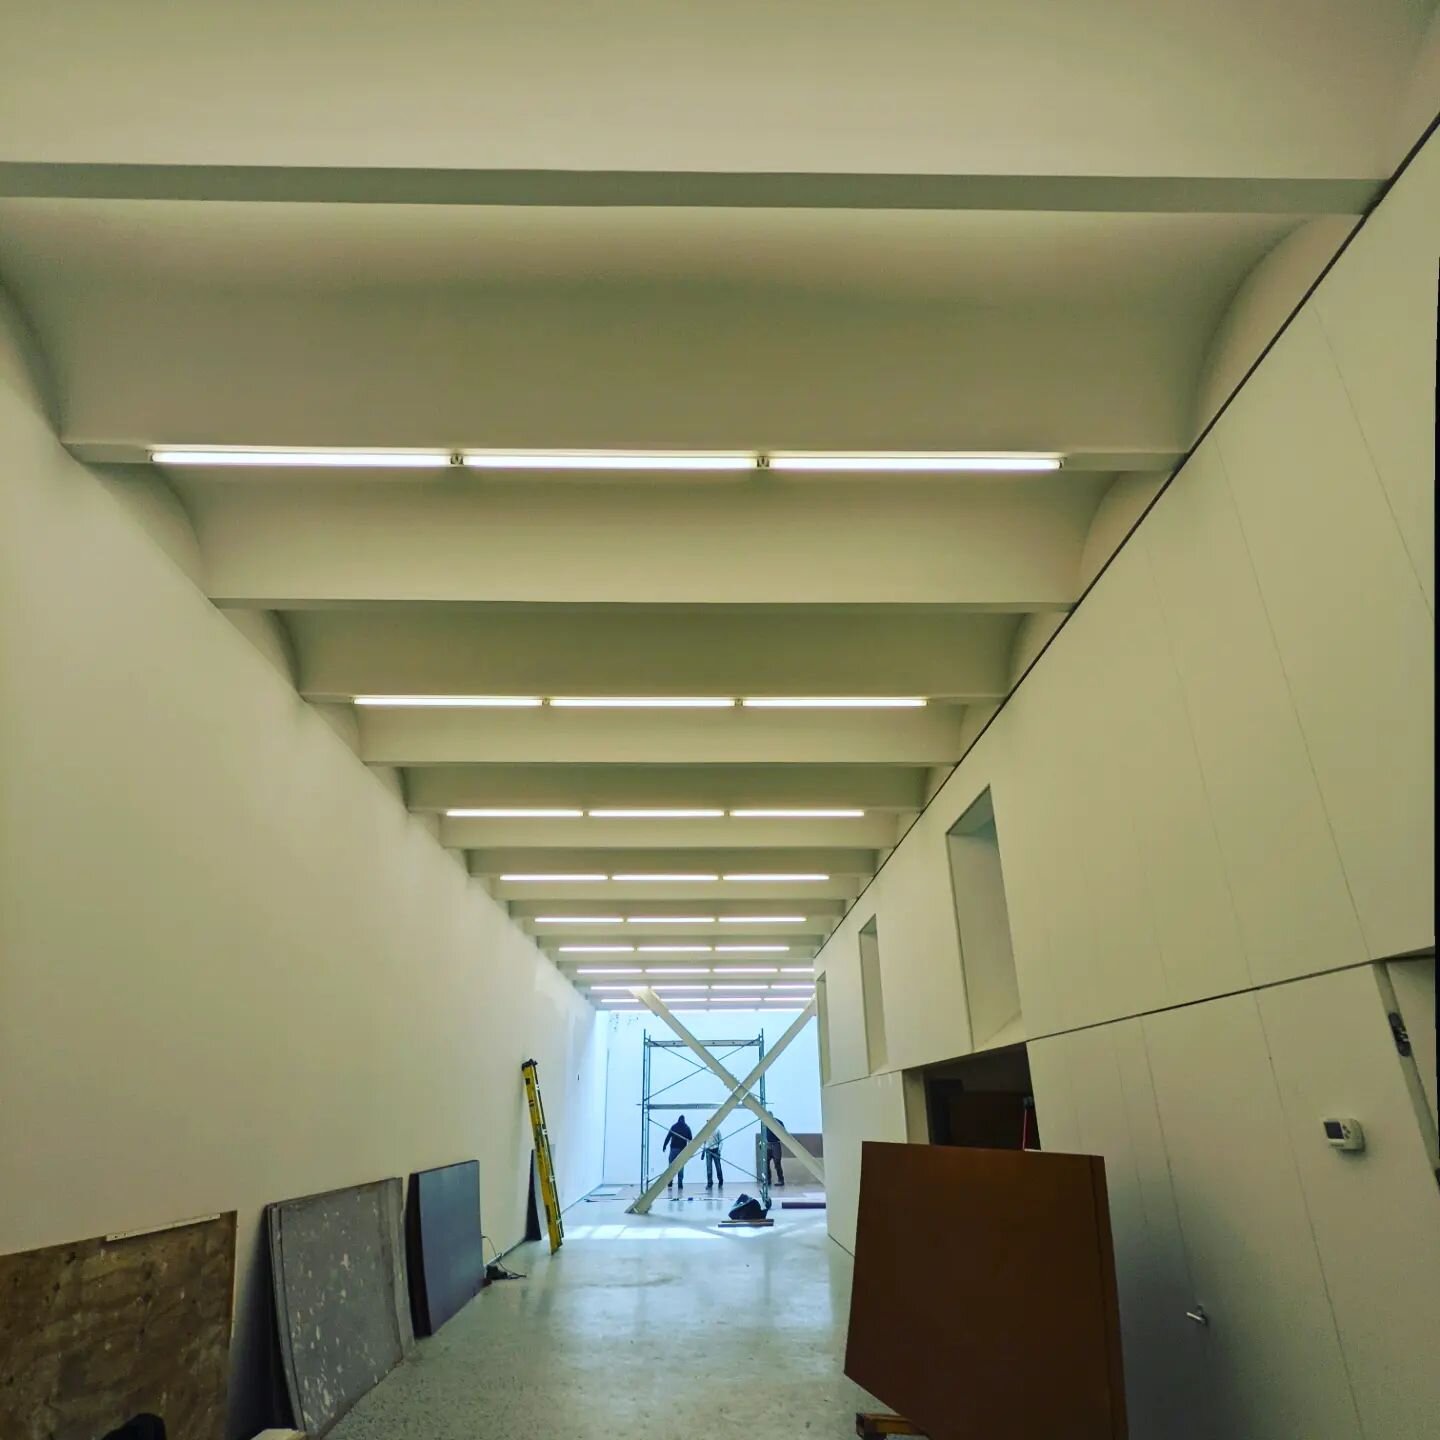 Soundproofed a 2000 SF complete artist studio all walls, ceiling, doors and skylights with a switchable glass. 

#soundproofing 
#soundproof 
#brooklyn 
#noisyneighbors 
#newyorkcity 
#newyork 
#nyc
#manhattan 
#queens